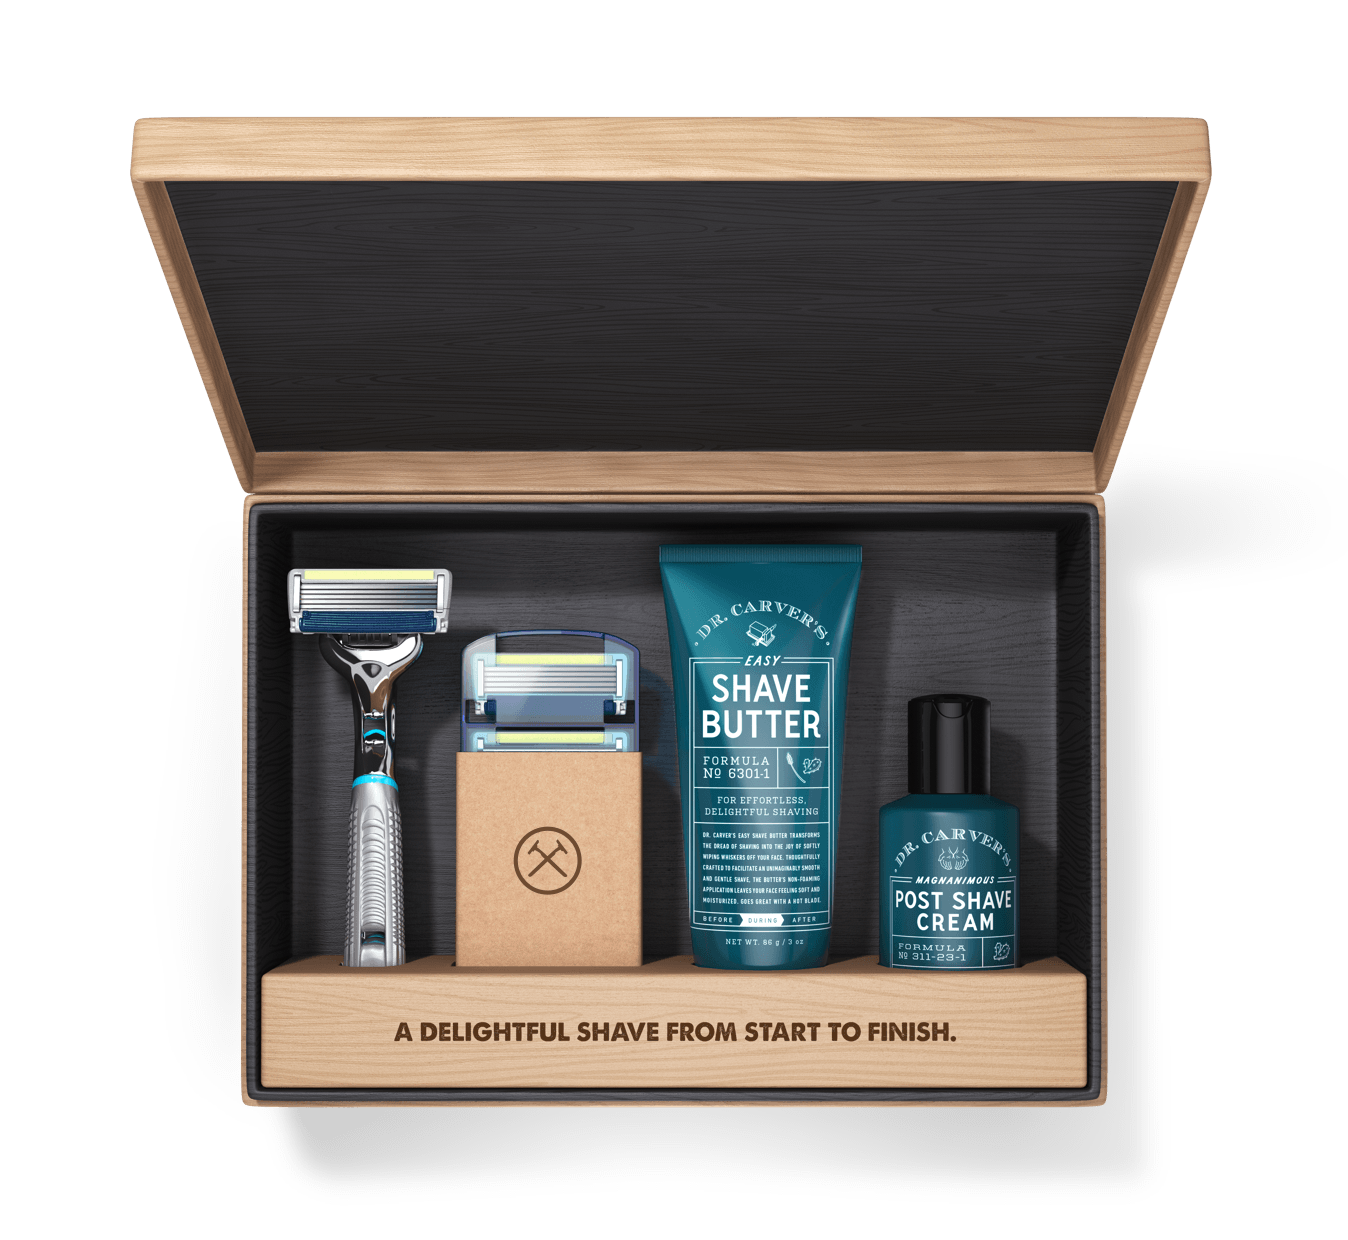 Dollar shave club special gift pack